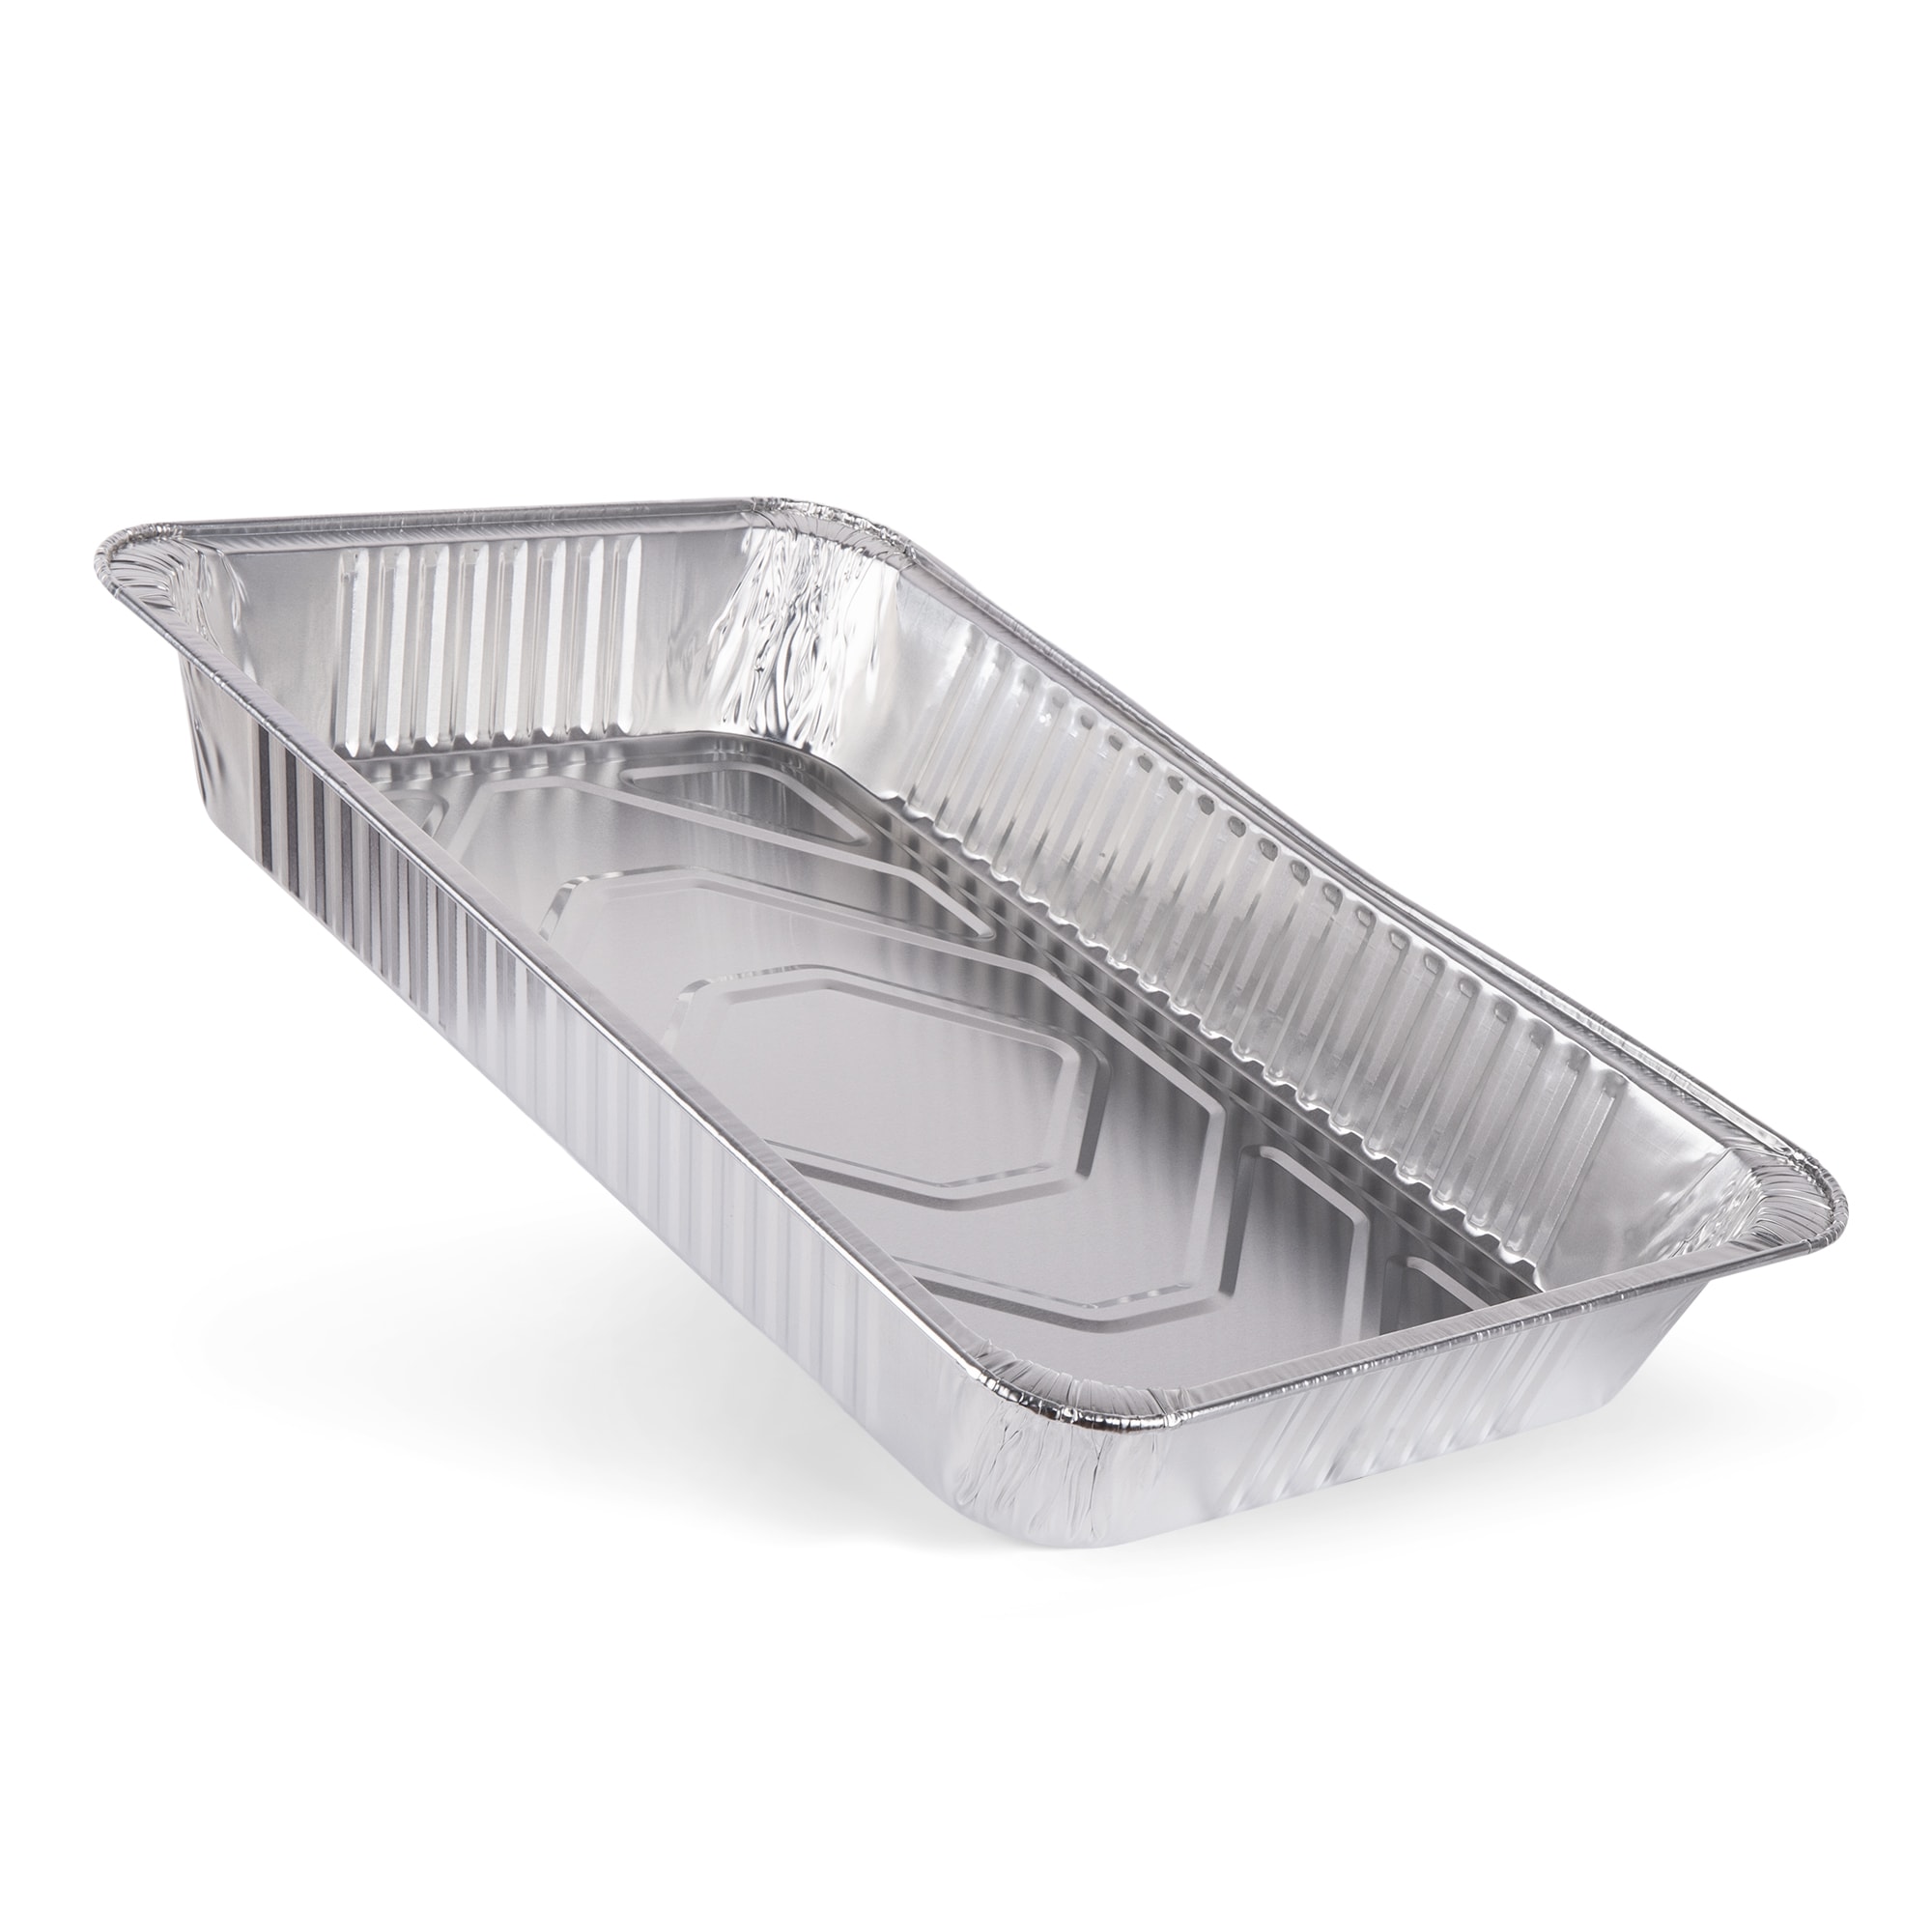 Glad Silver 2-Piece Aluminum Roaster Pan in the Bakeware